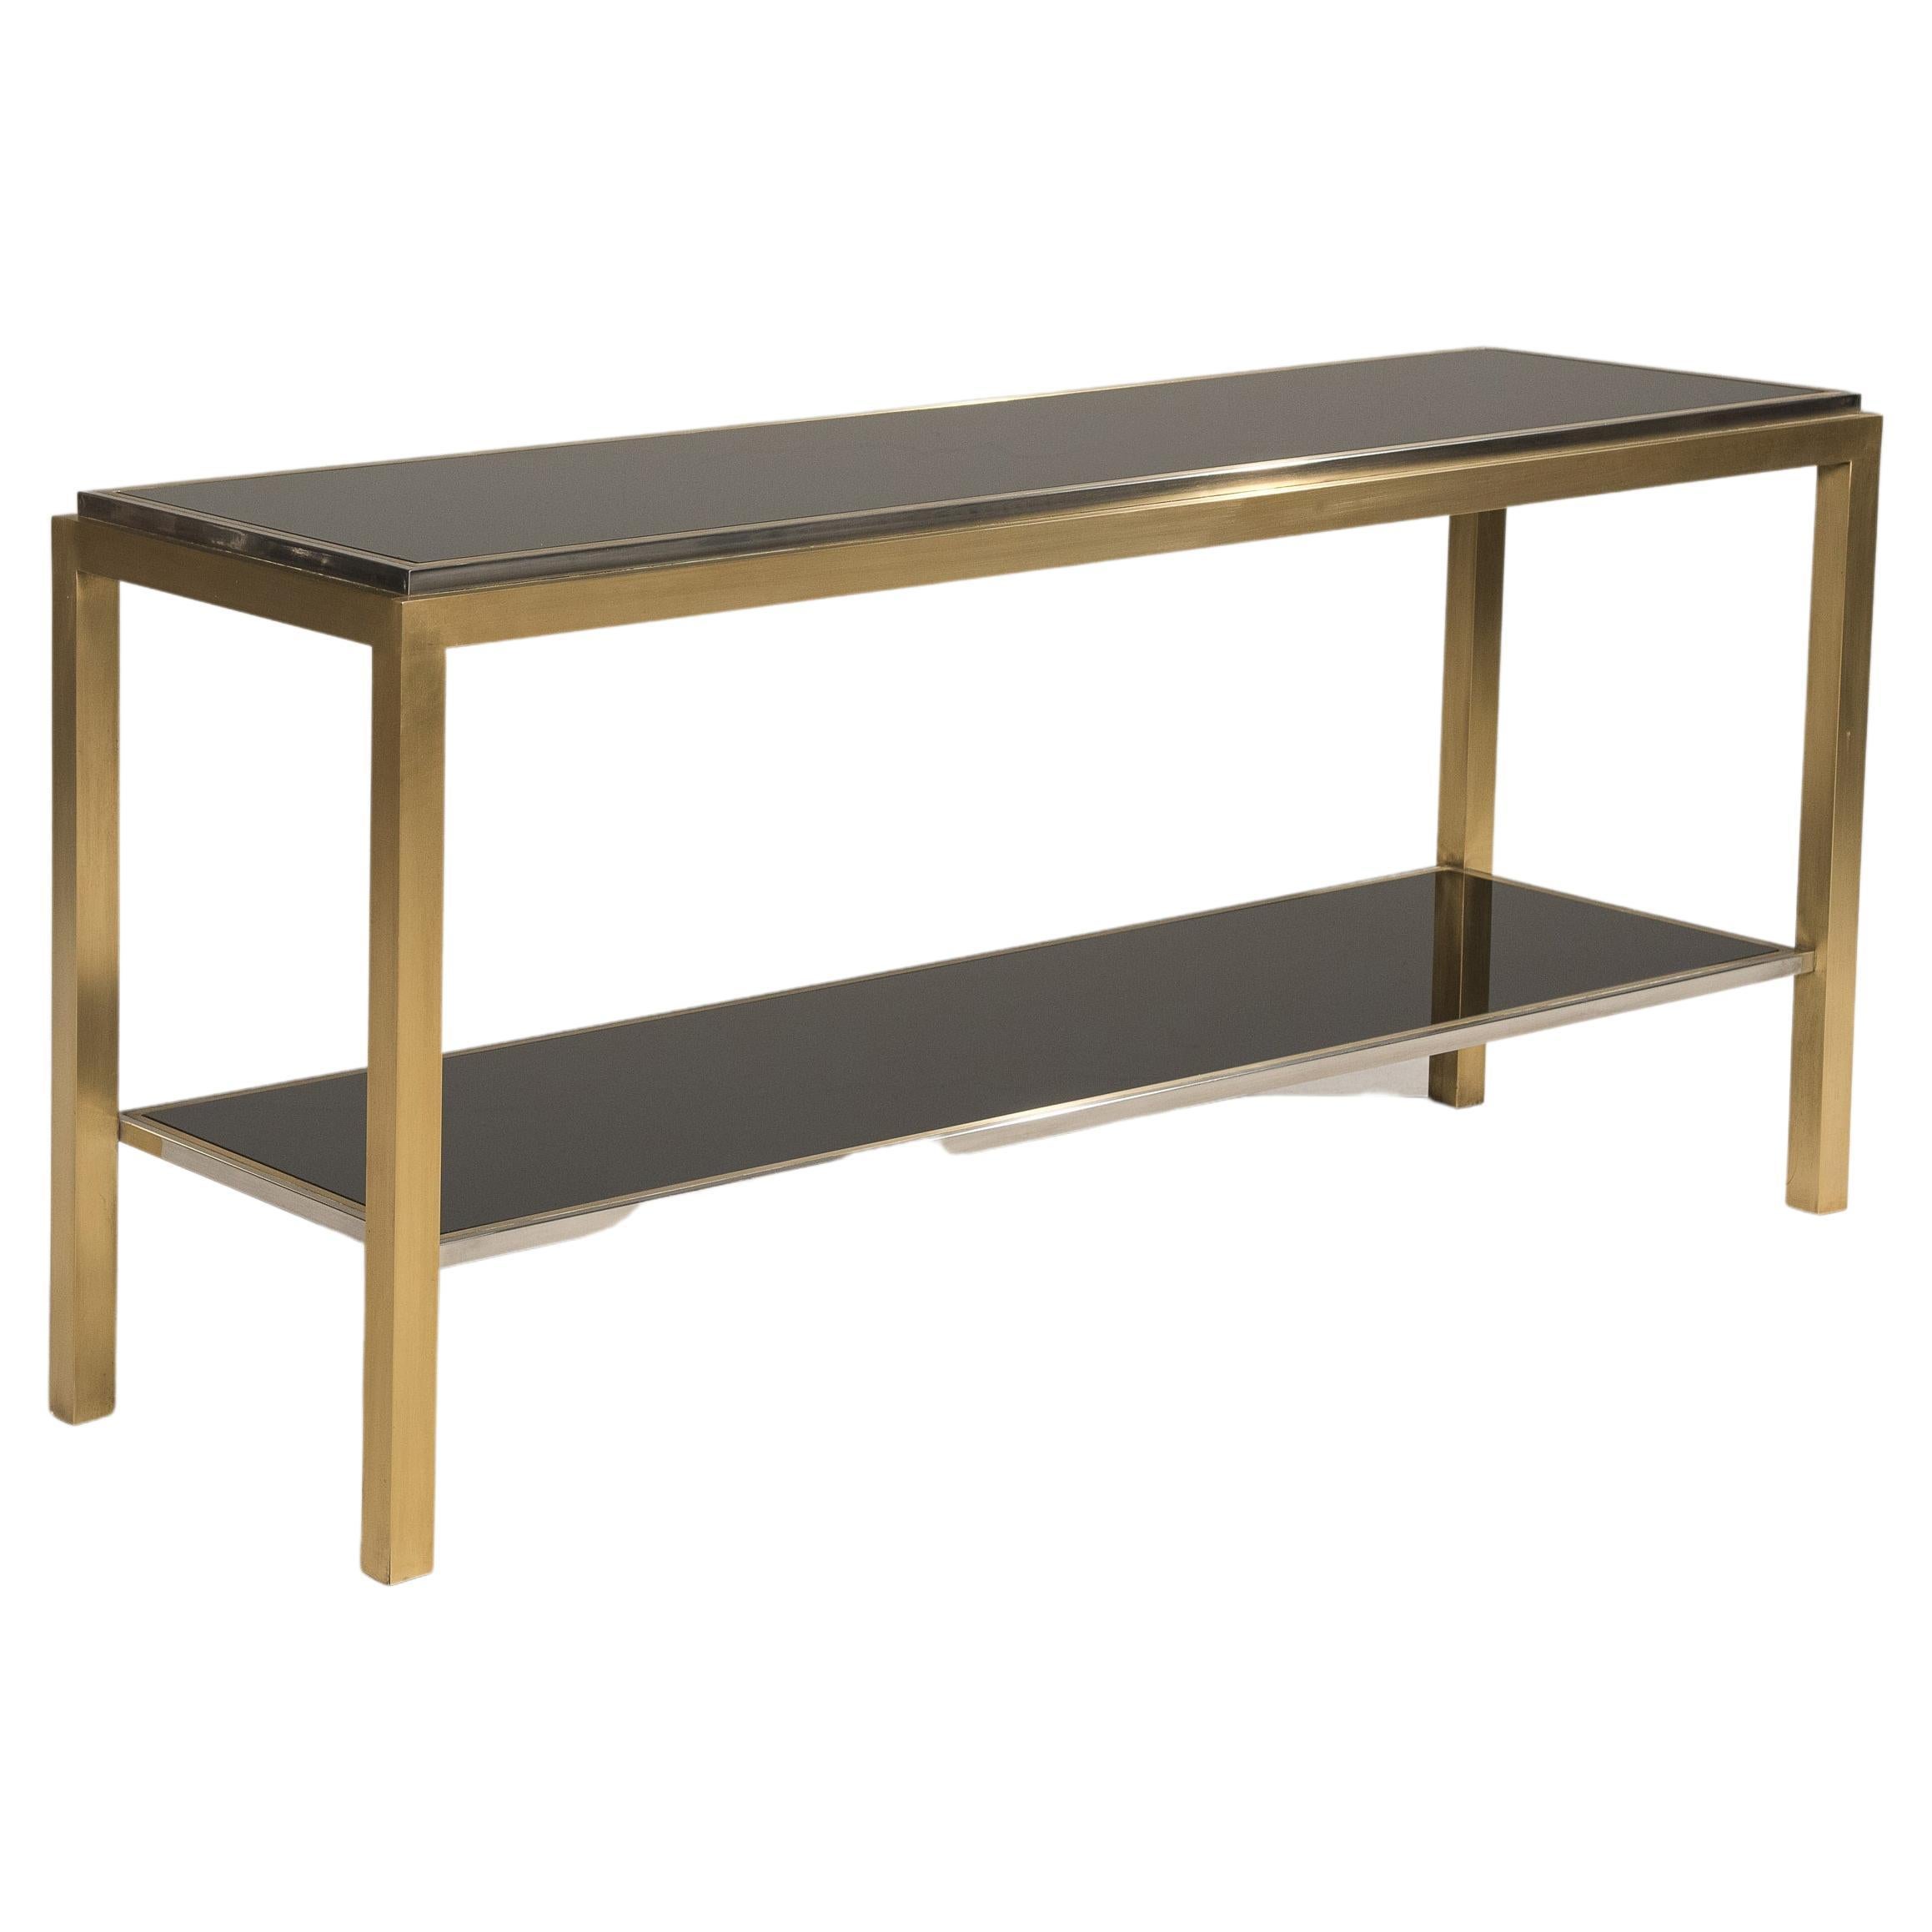 1970s Willy Rizzo Style Brass Steel Smoked Glasses Console Table